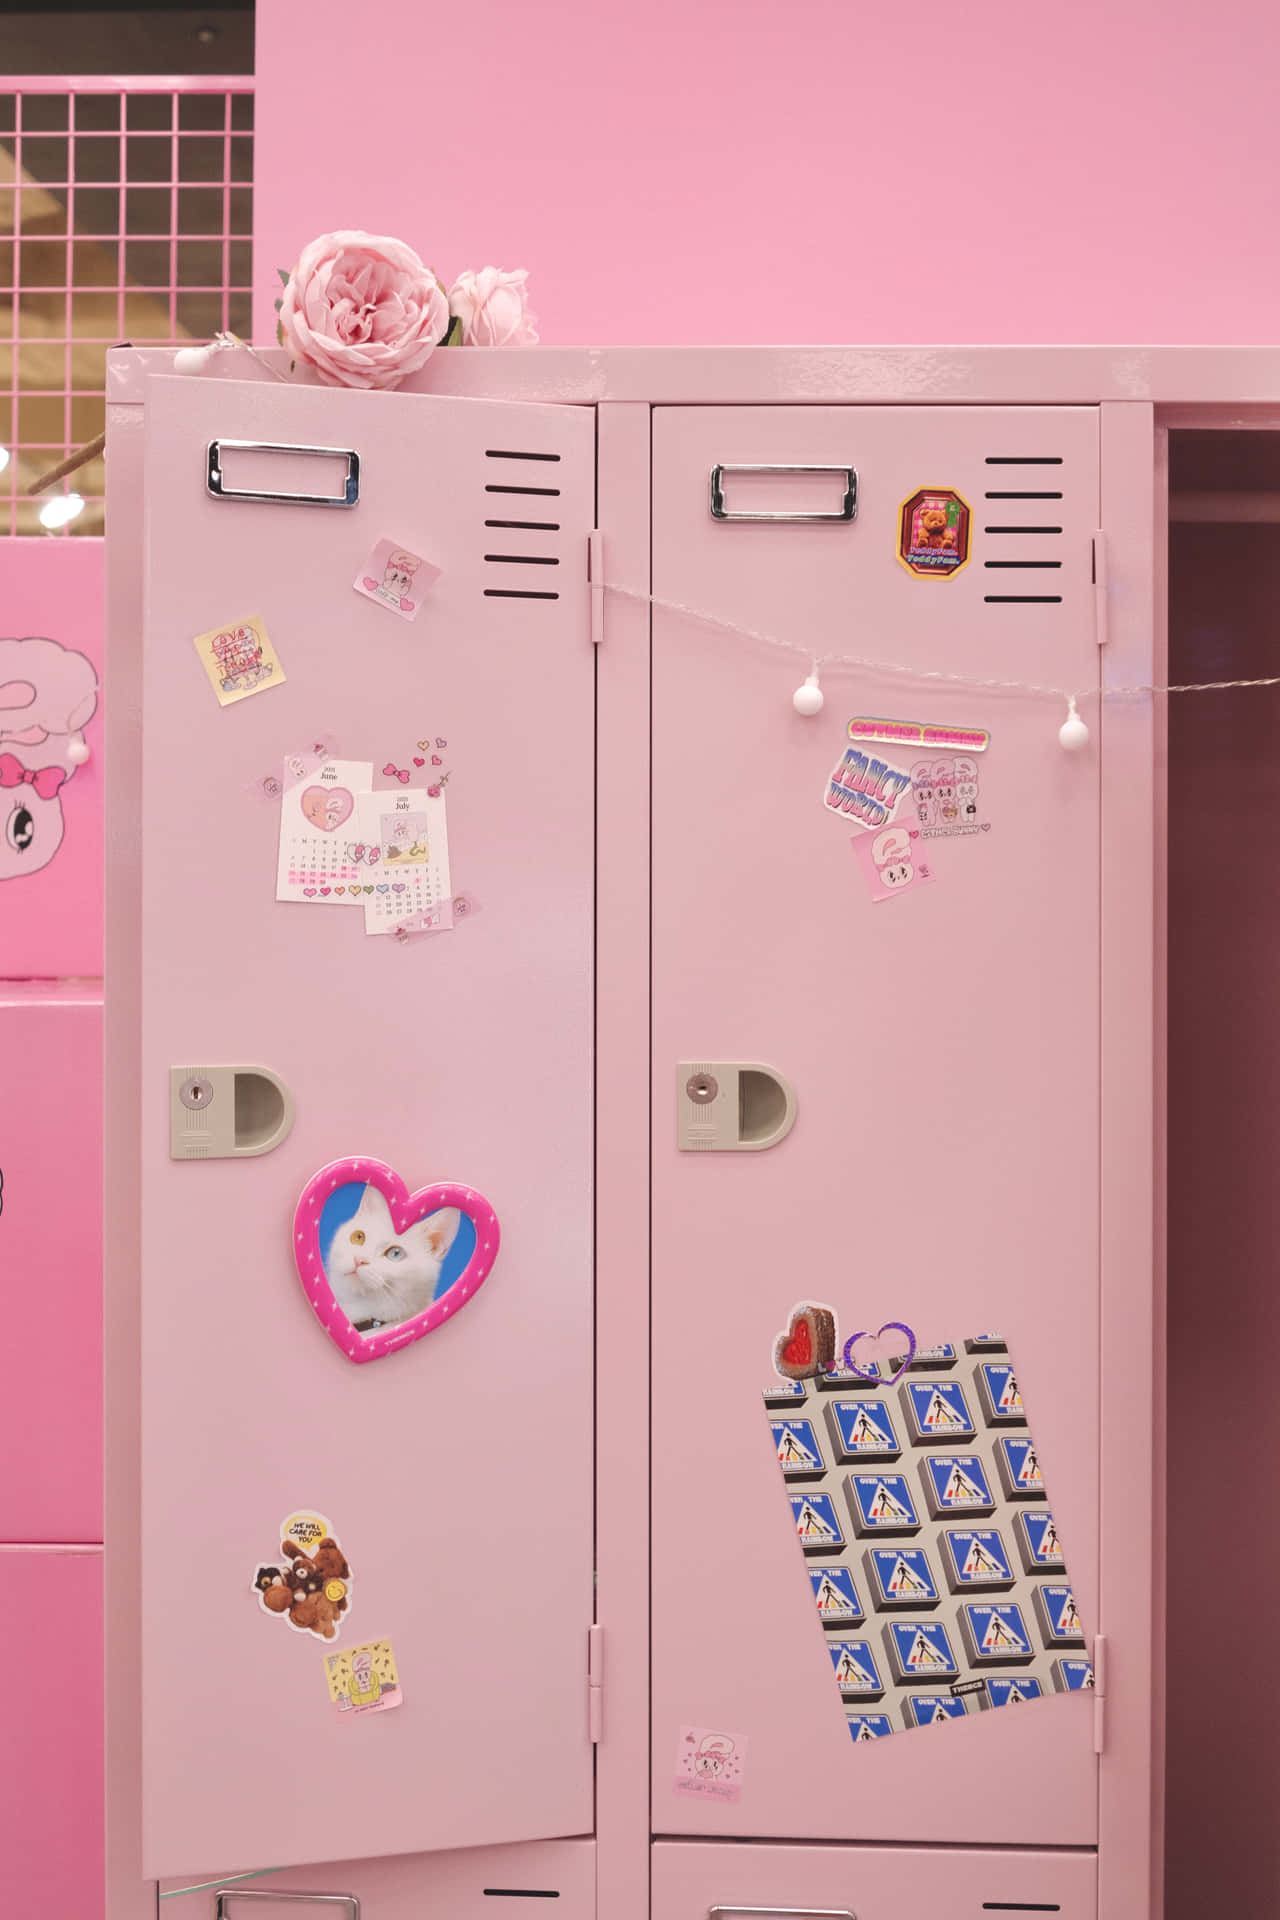 A Pink Locker With Stickers On It